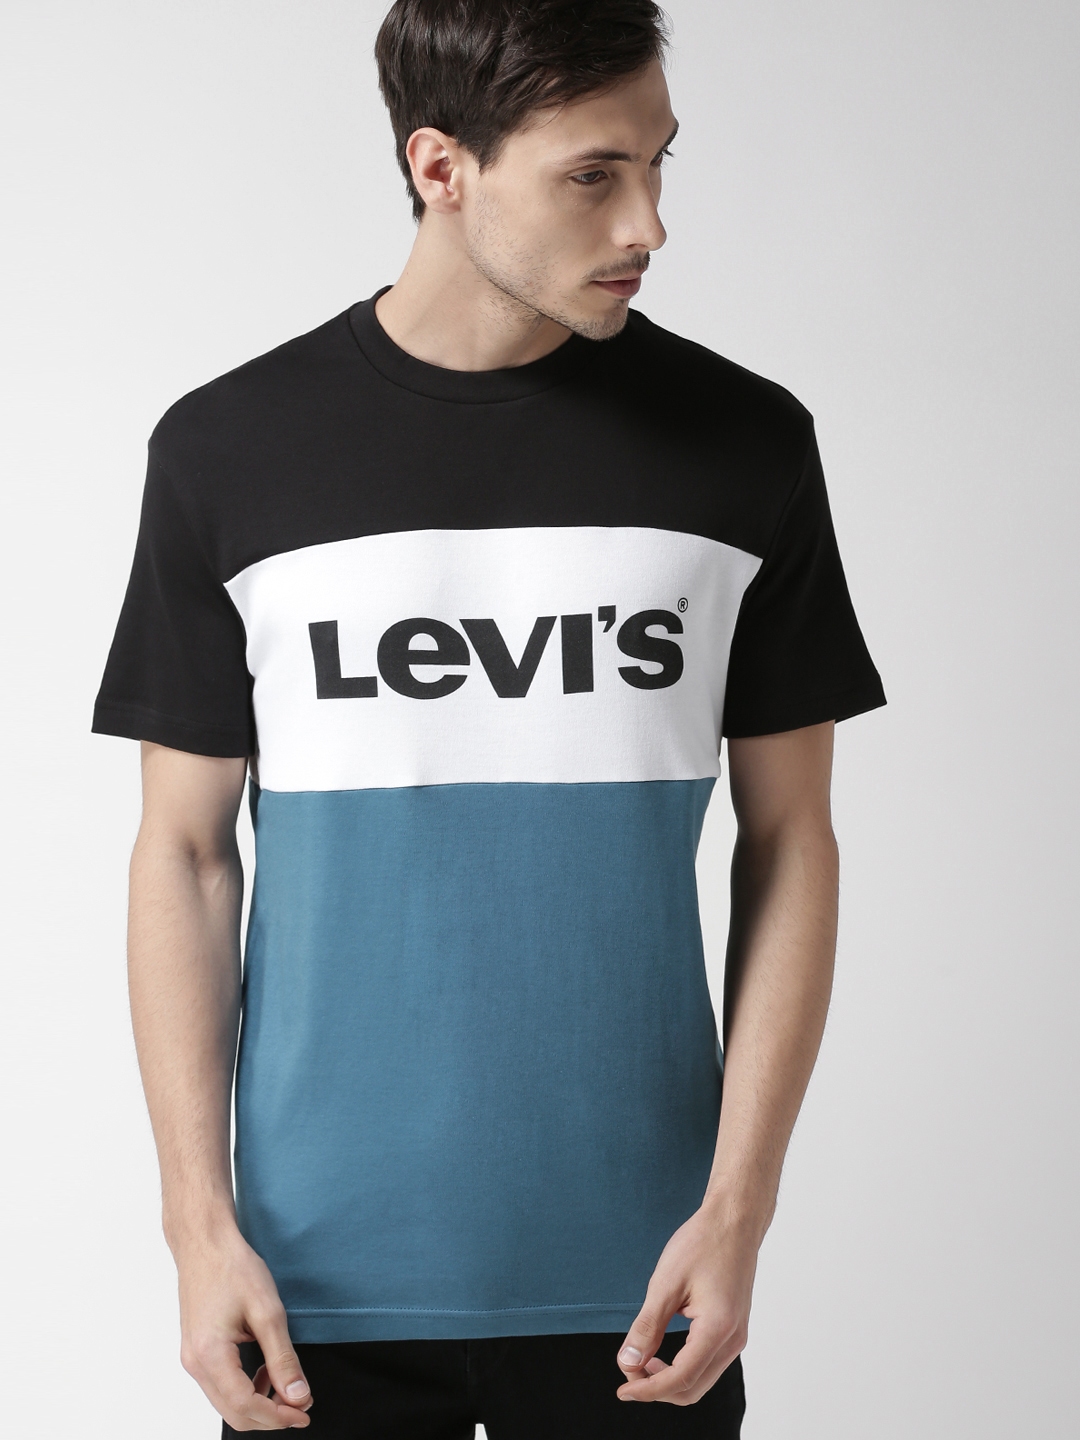 price of levis t shirt